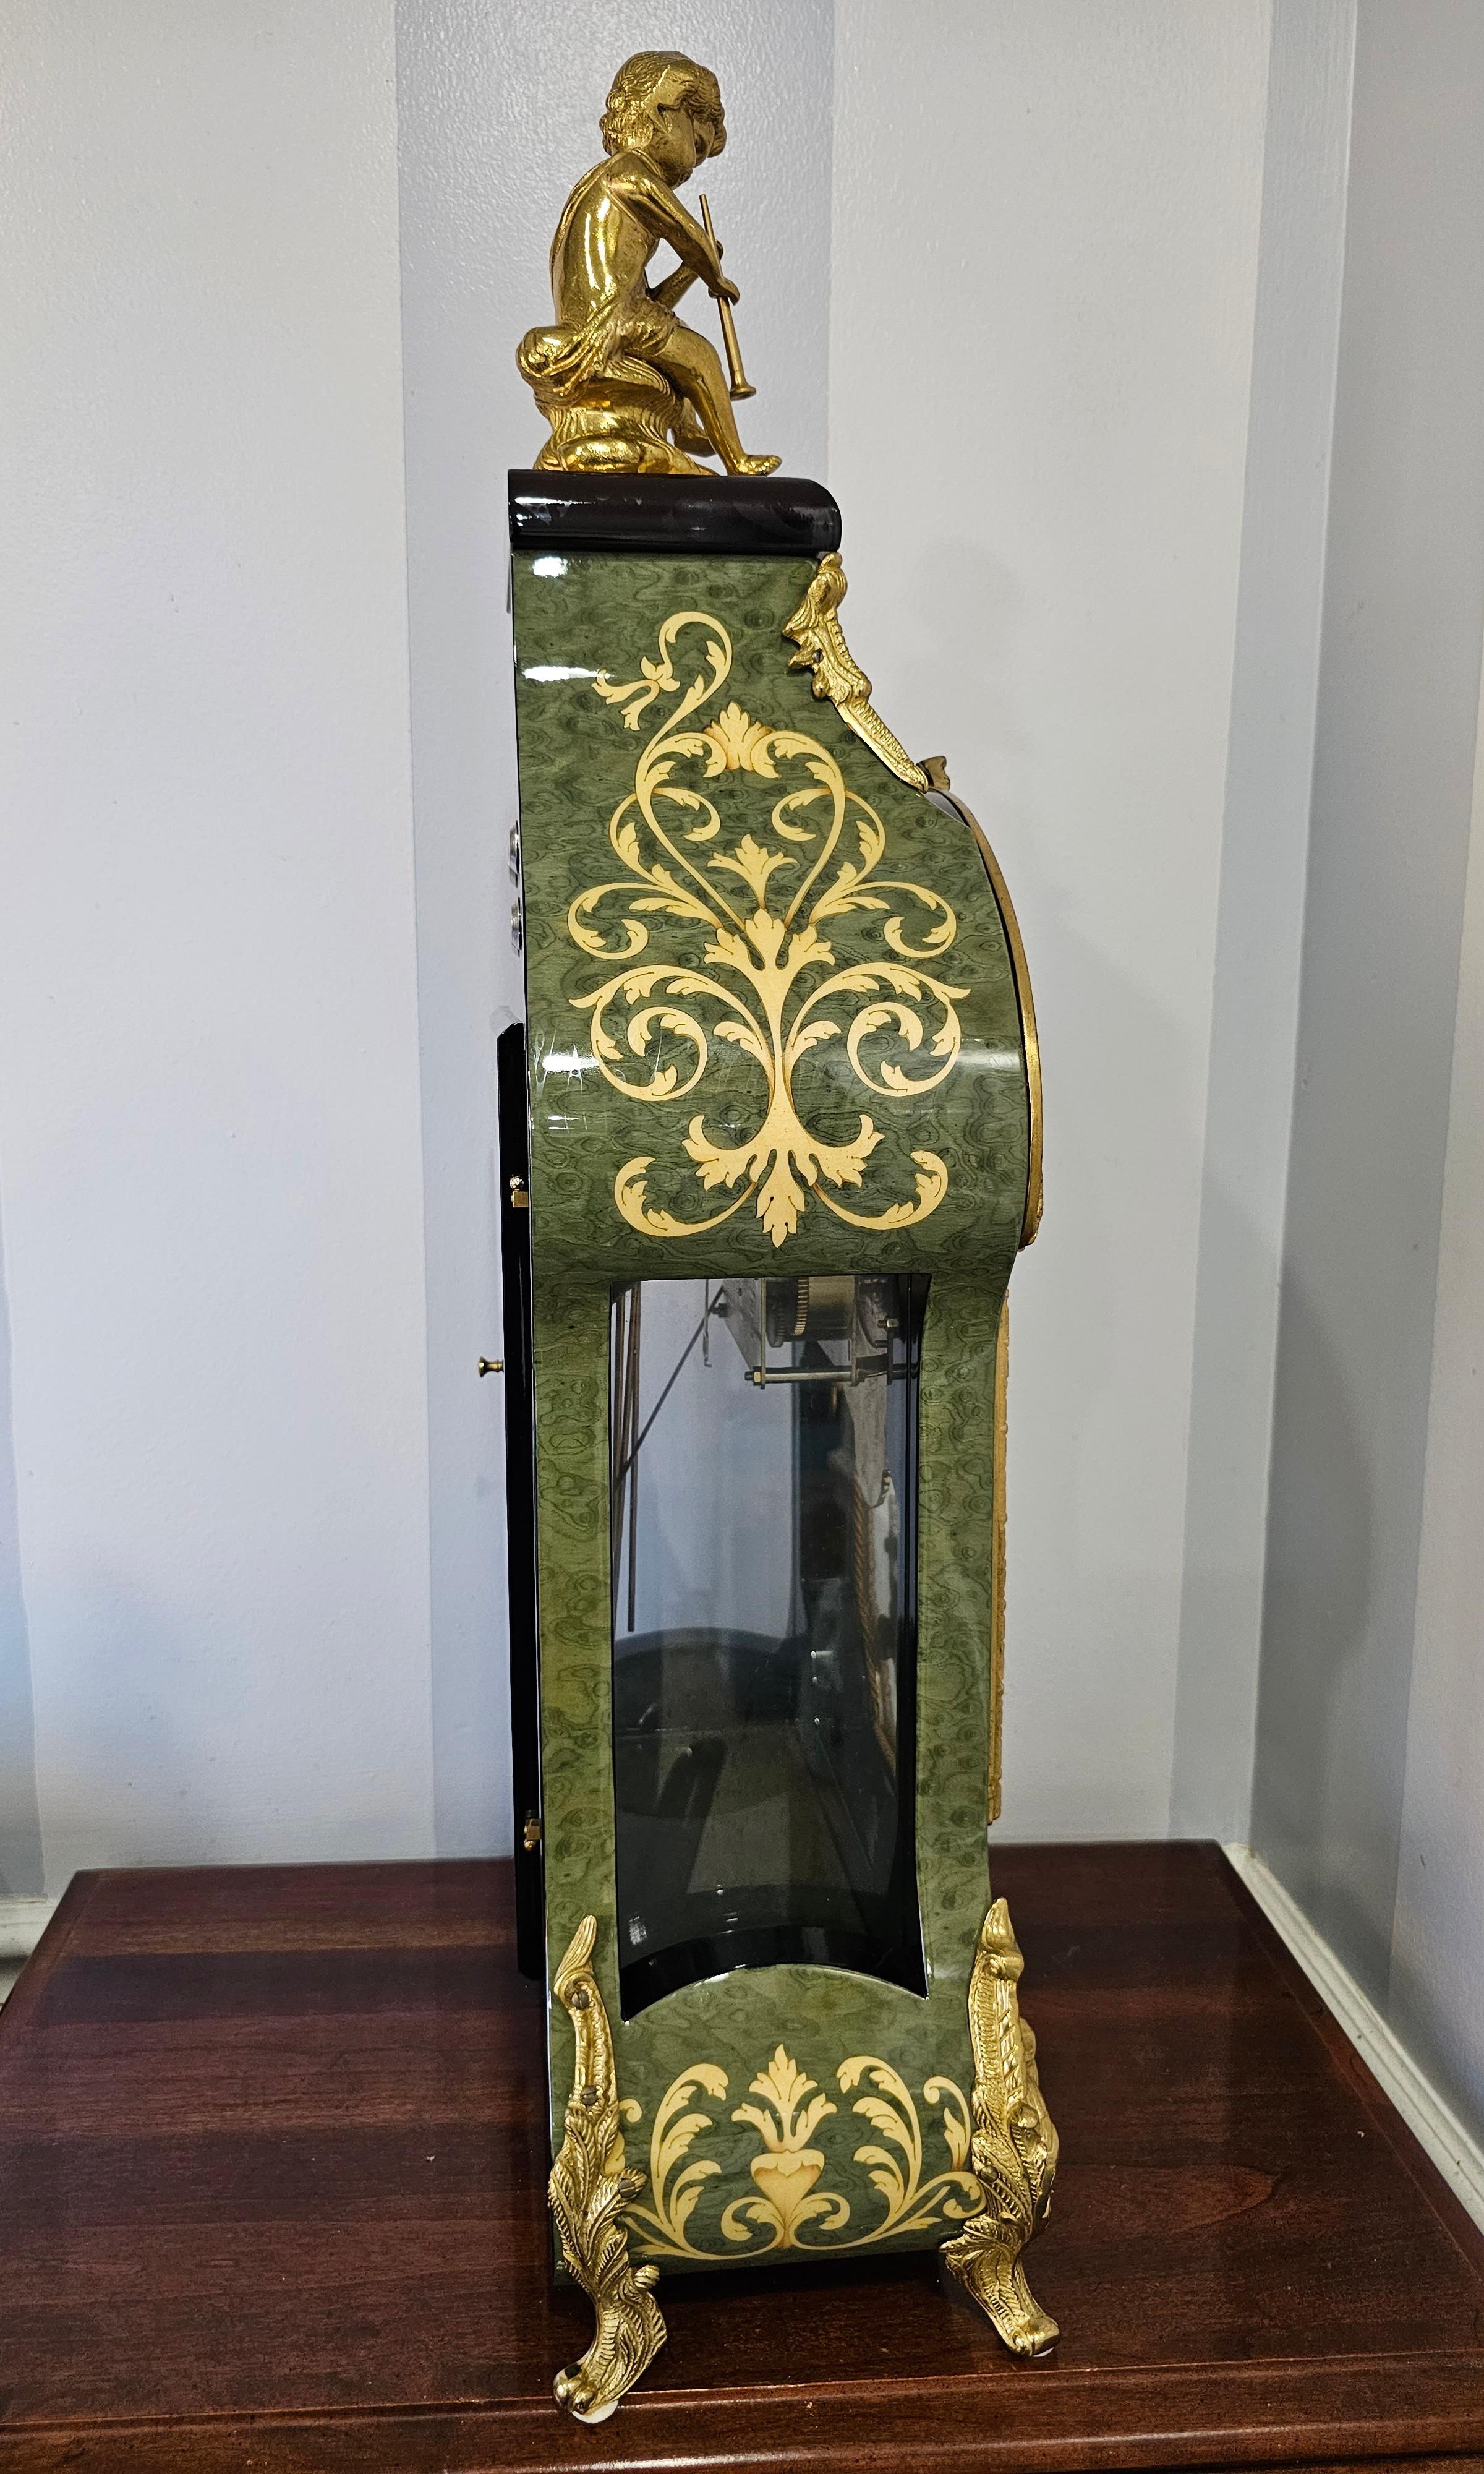 Post-Modern New Franz Hermle Mantel Clock in DeArt Italian Fine Marquetry and Ormolu Case For Sale